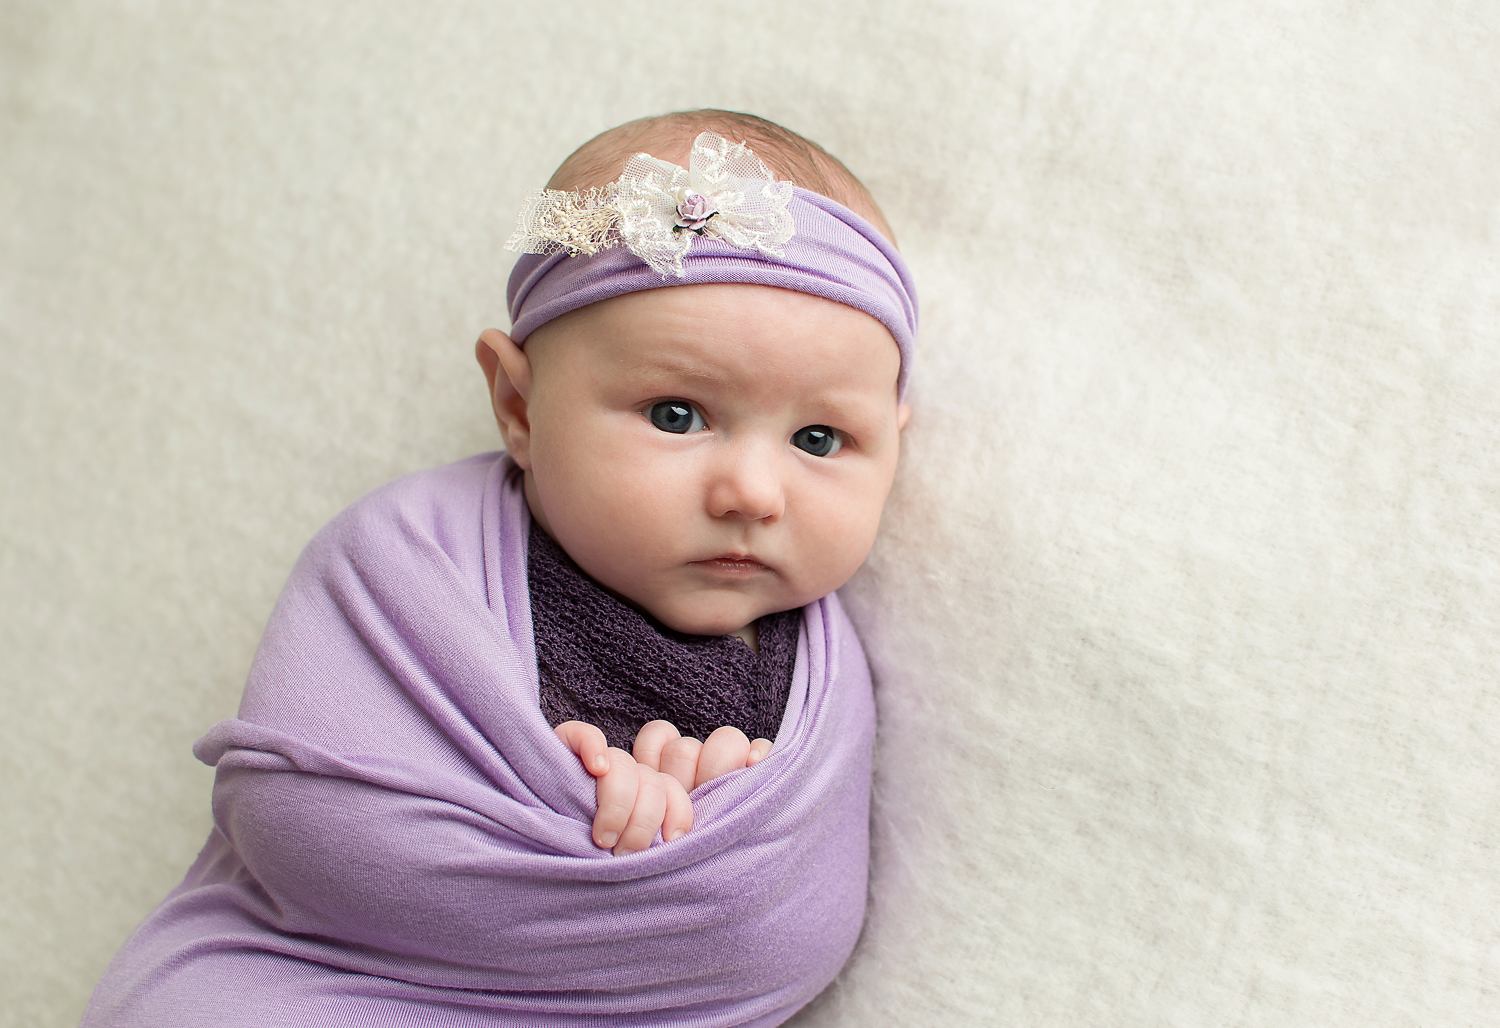 October-2016-Tabatha-Sue-Photography-Best-baby-photographer-in-parma-ohio-near-cleveland-ohio-baby-in-purple-headband-and-wrap-professional-home-studio-in-44130.png